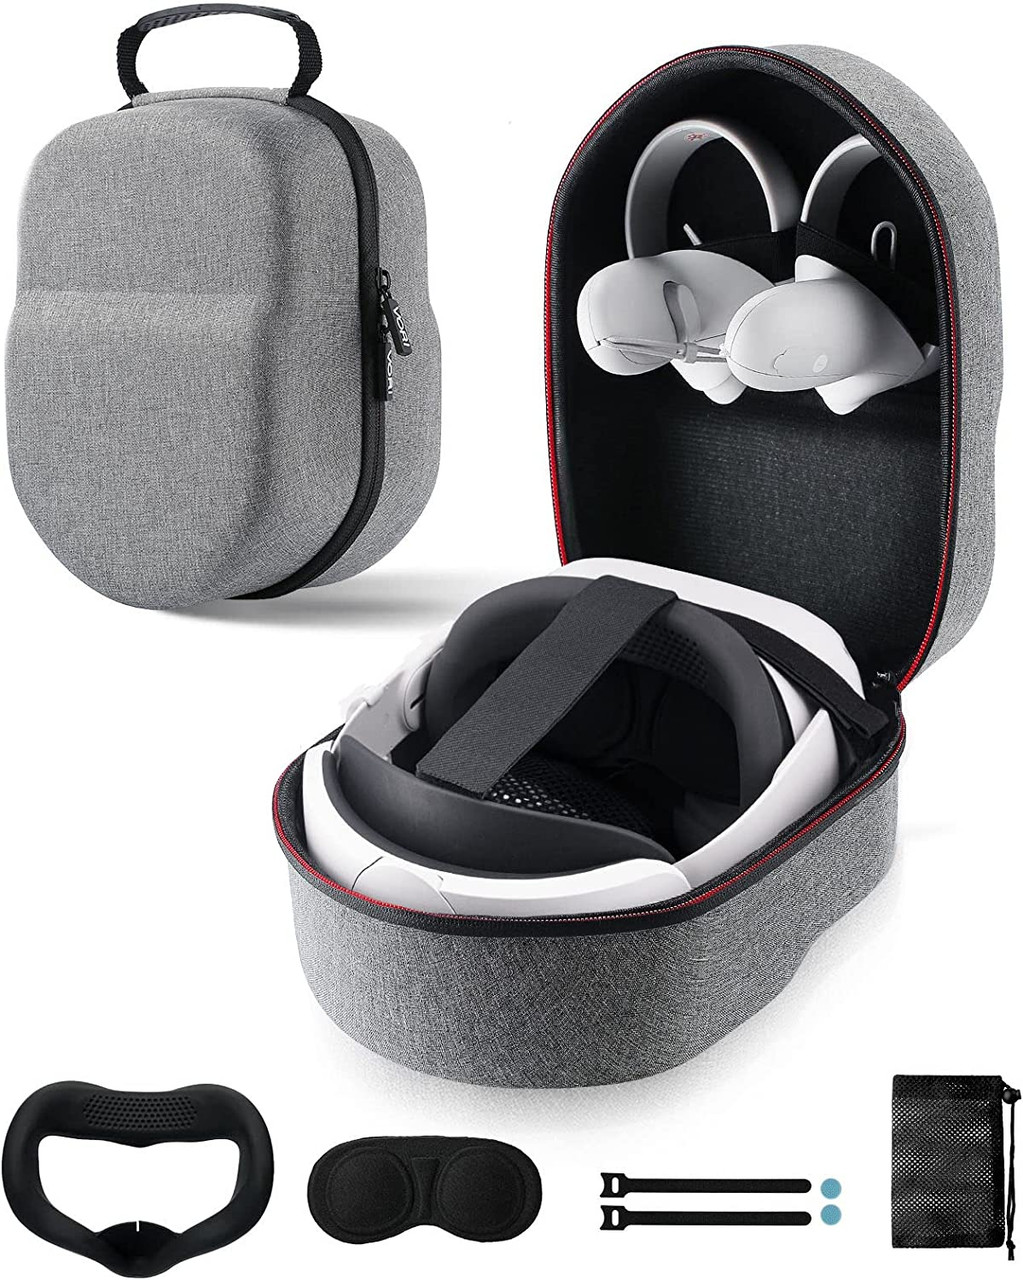  Flyekist Storage Bag for DJI Mini 2-Newest Mini 2 Drone Case  Hard Shell Travel Carrying case Compatible with DJI Mini 2 Drone and  Accessories-Grey. : Toys & Games